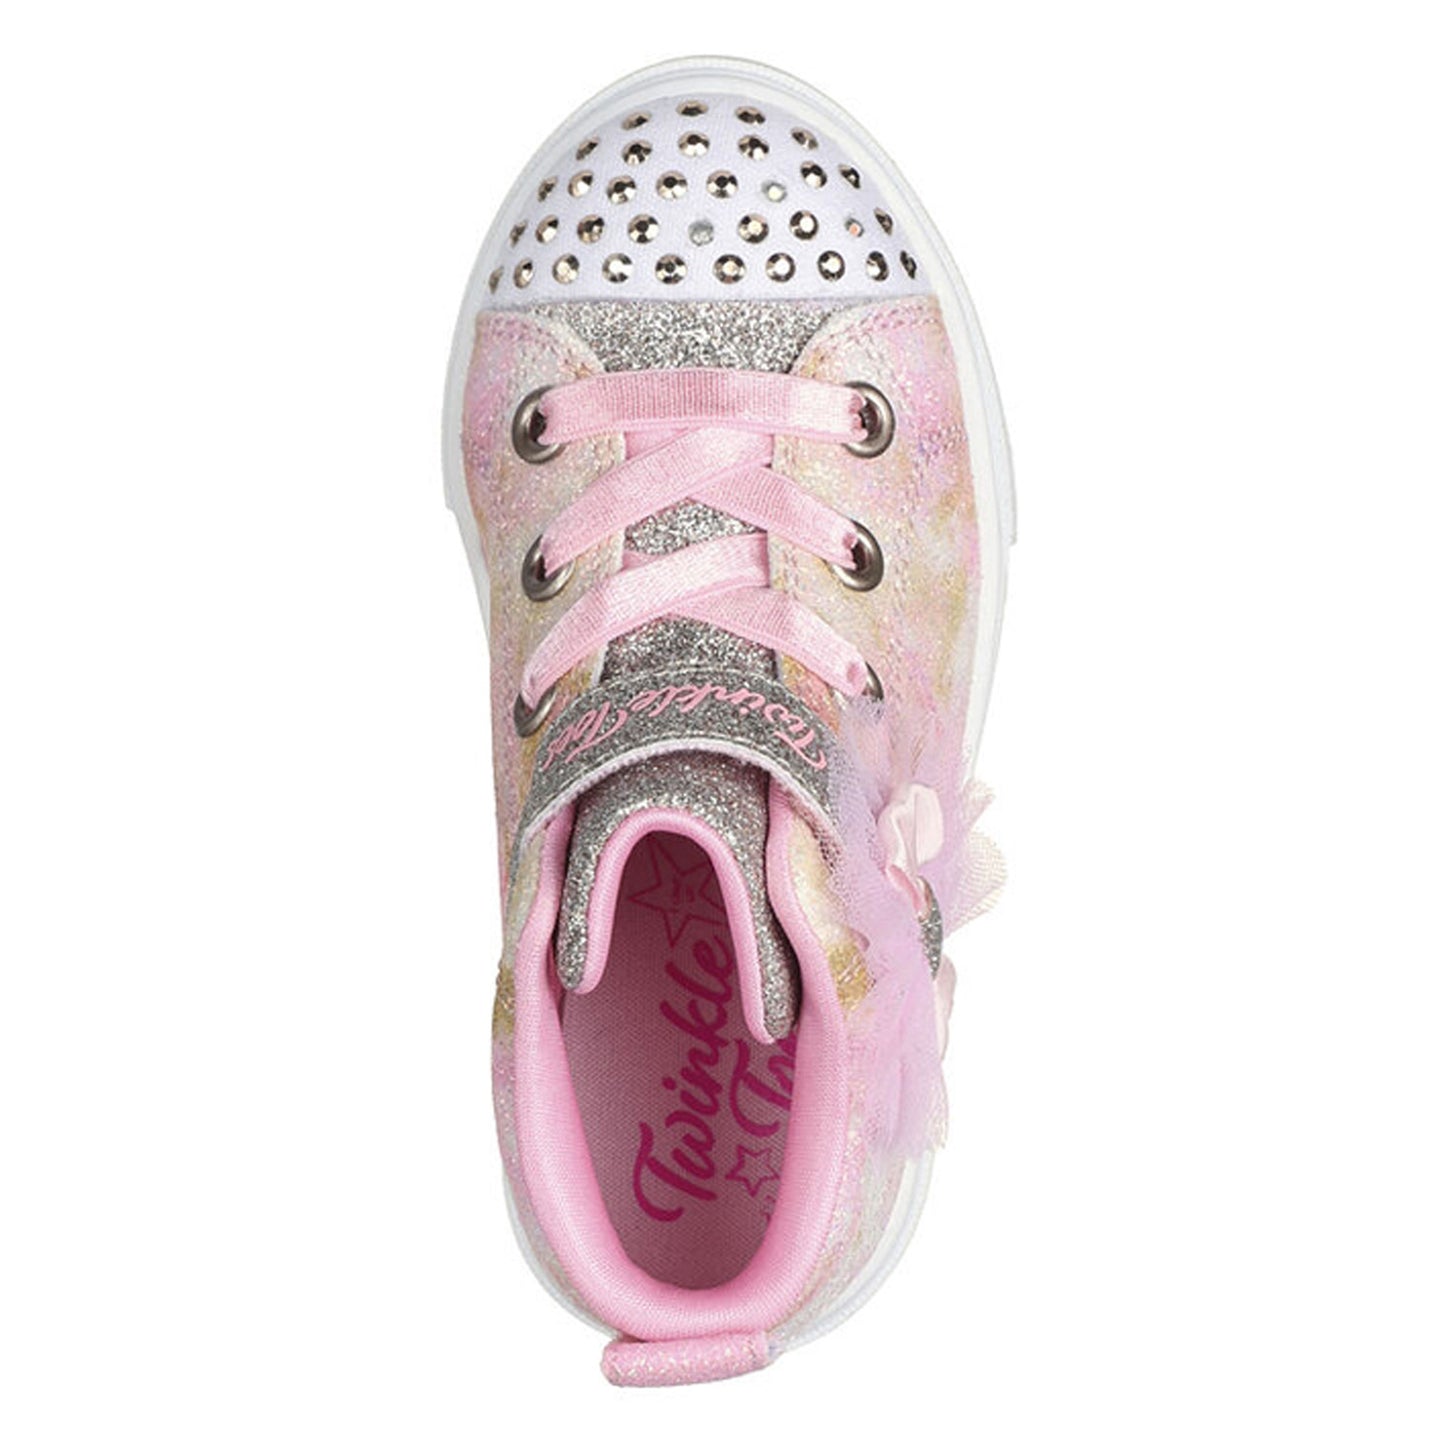 Peltz Shoes  Girl's Skechers Twinkle Toes: Twinkle Sparks - Ombre Dazzle Sneaker - Toddler Ombre Gold Multi 314804N-GDMT